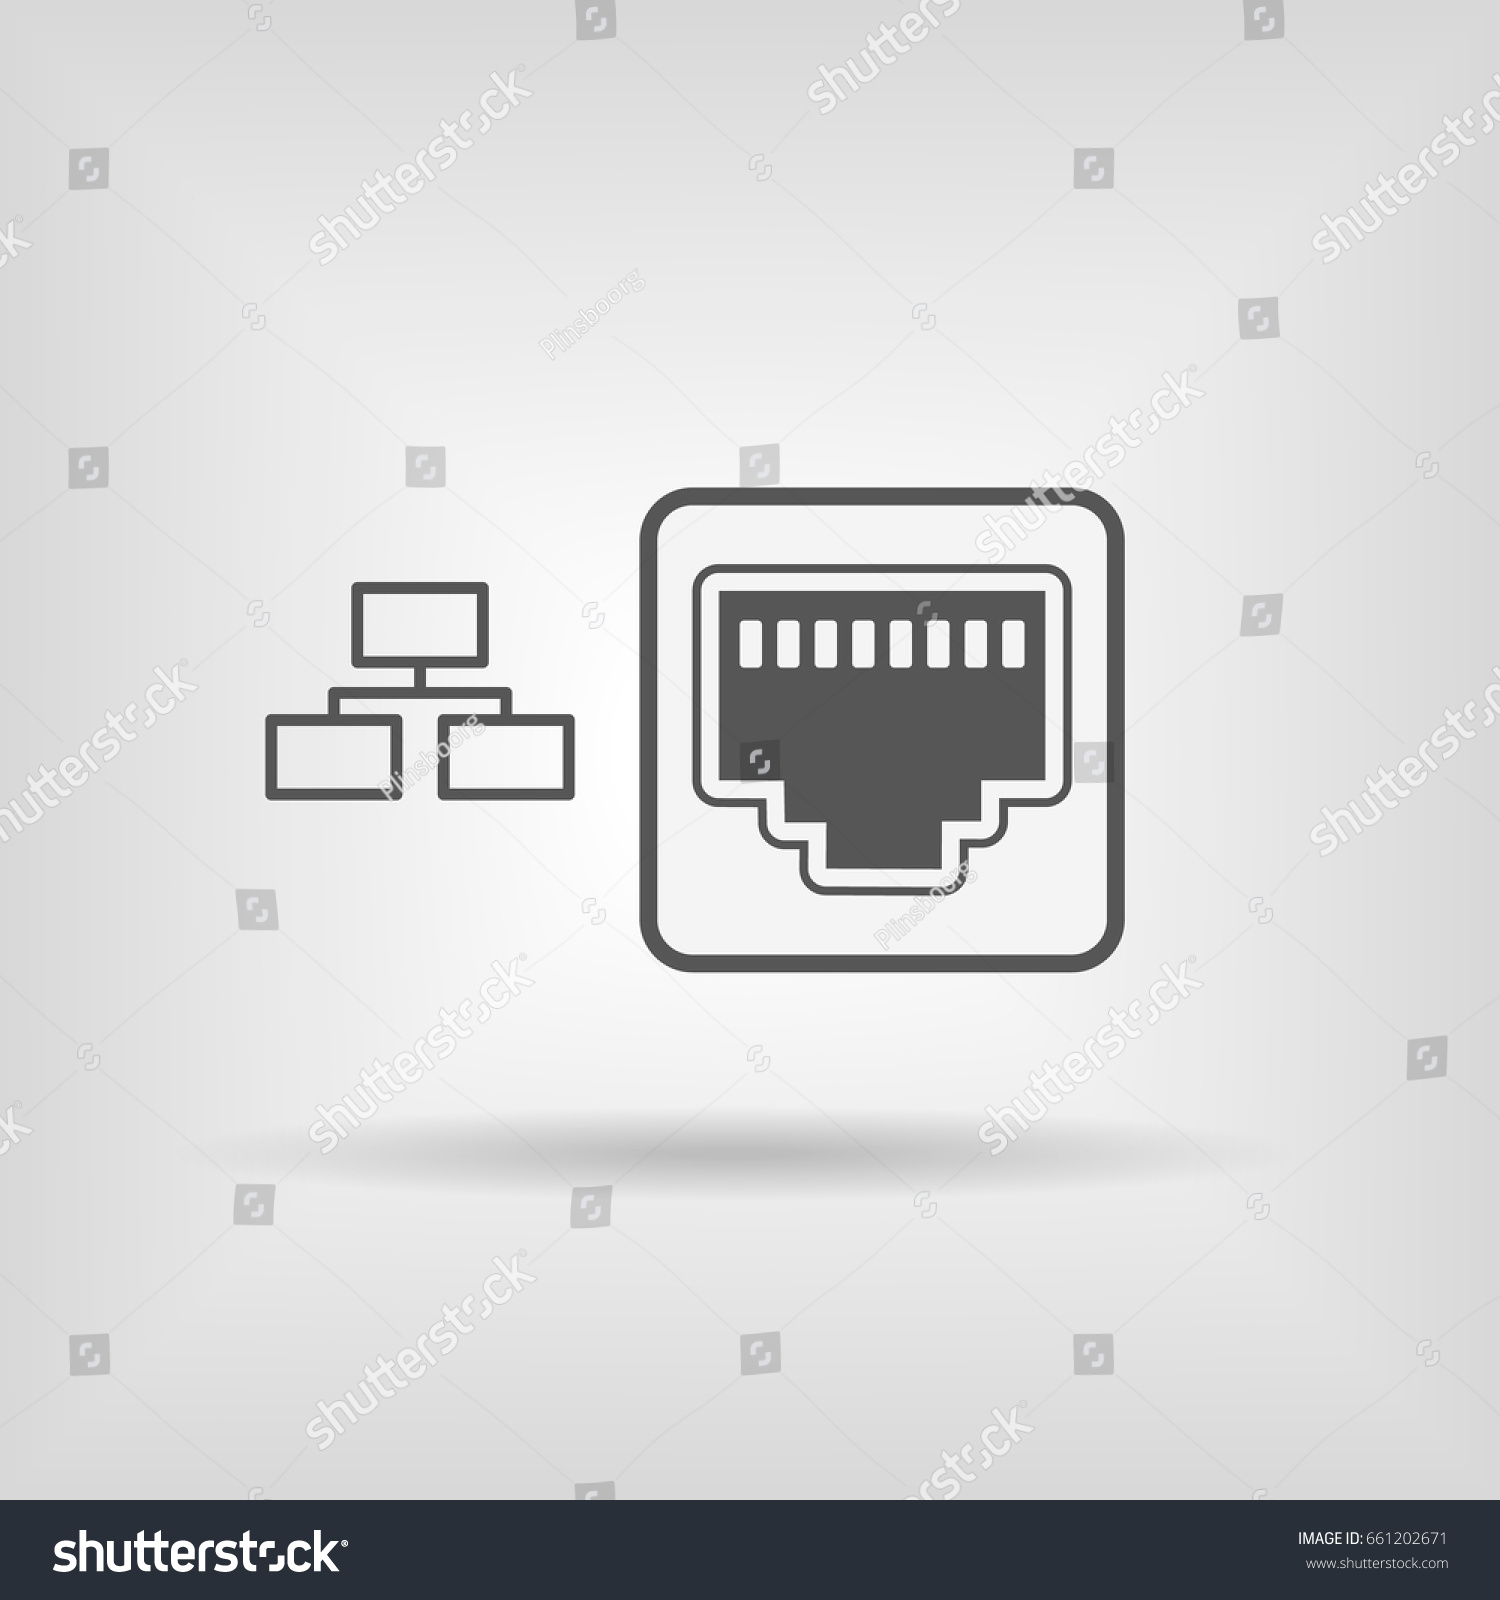 Shiny Network Port Icon With long shadow over app button  Stock 